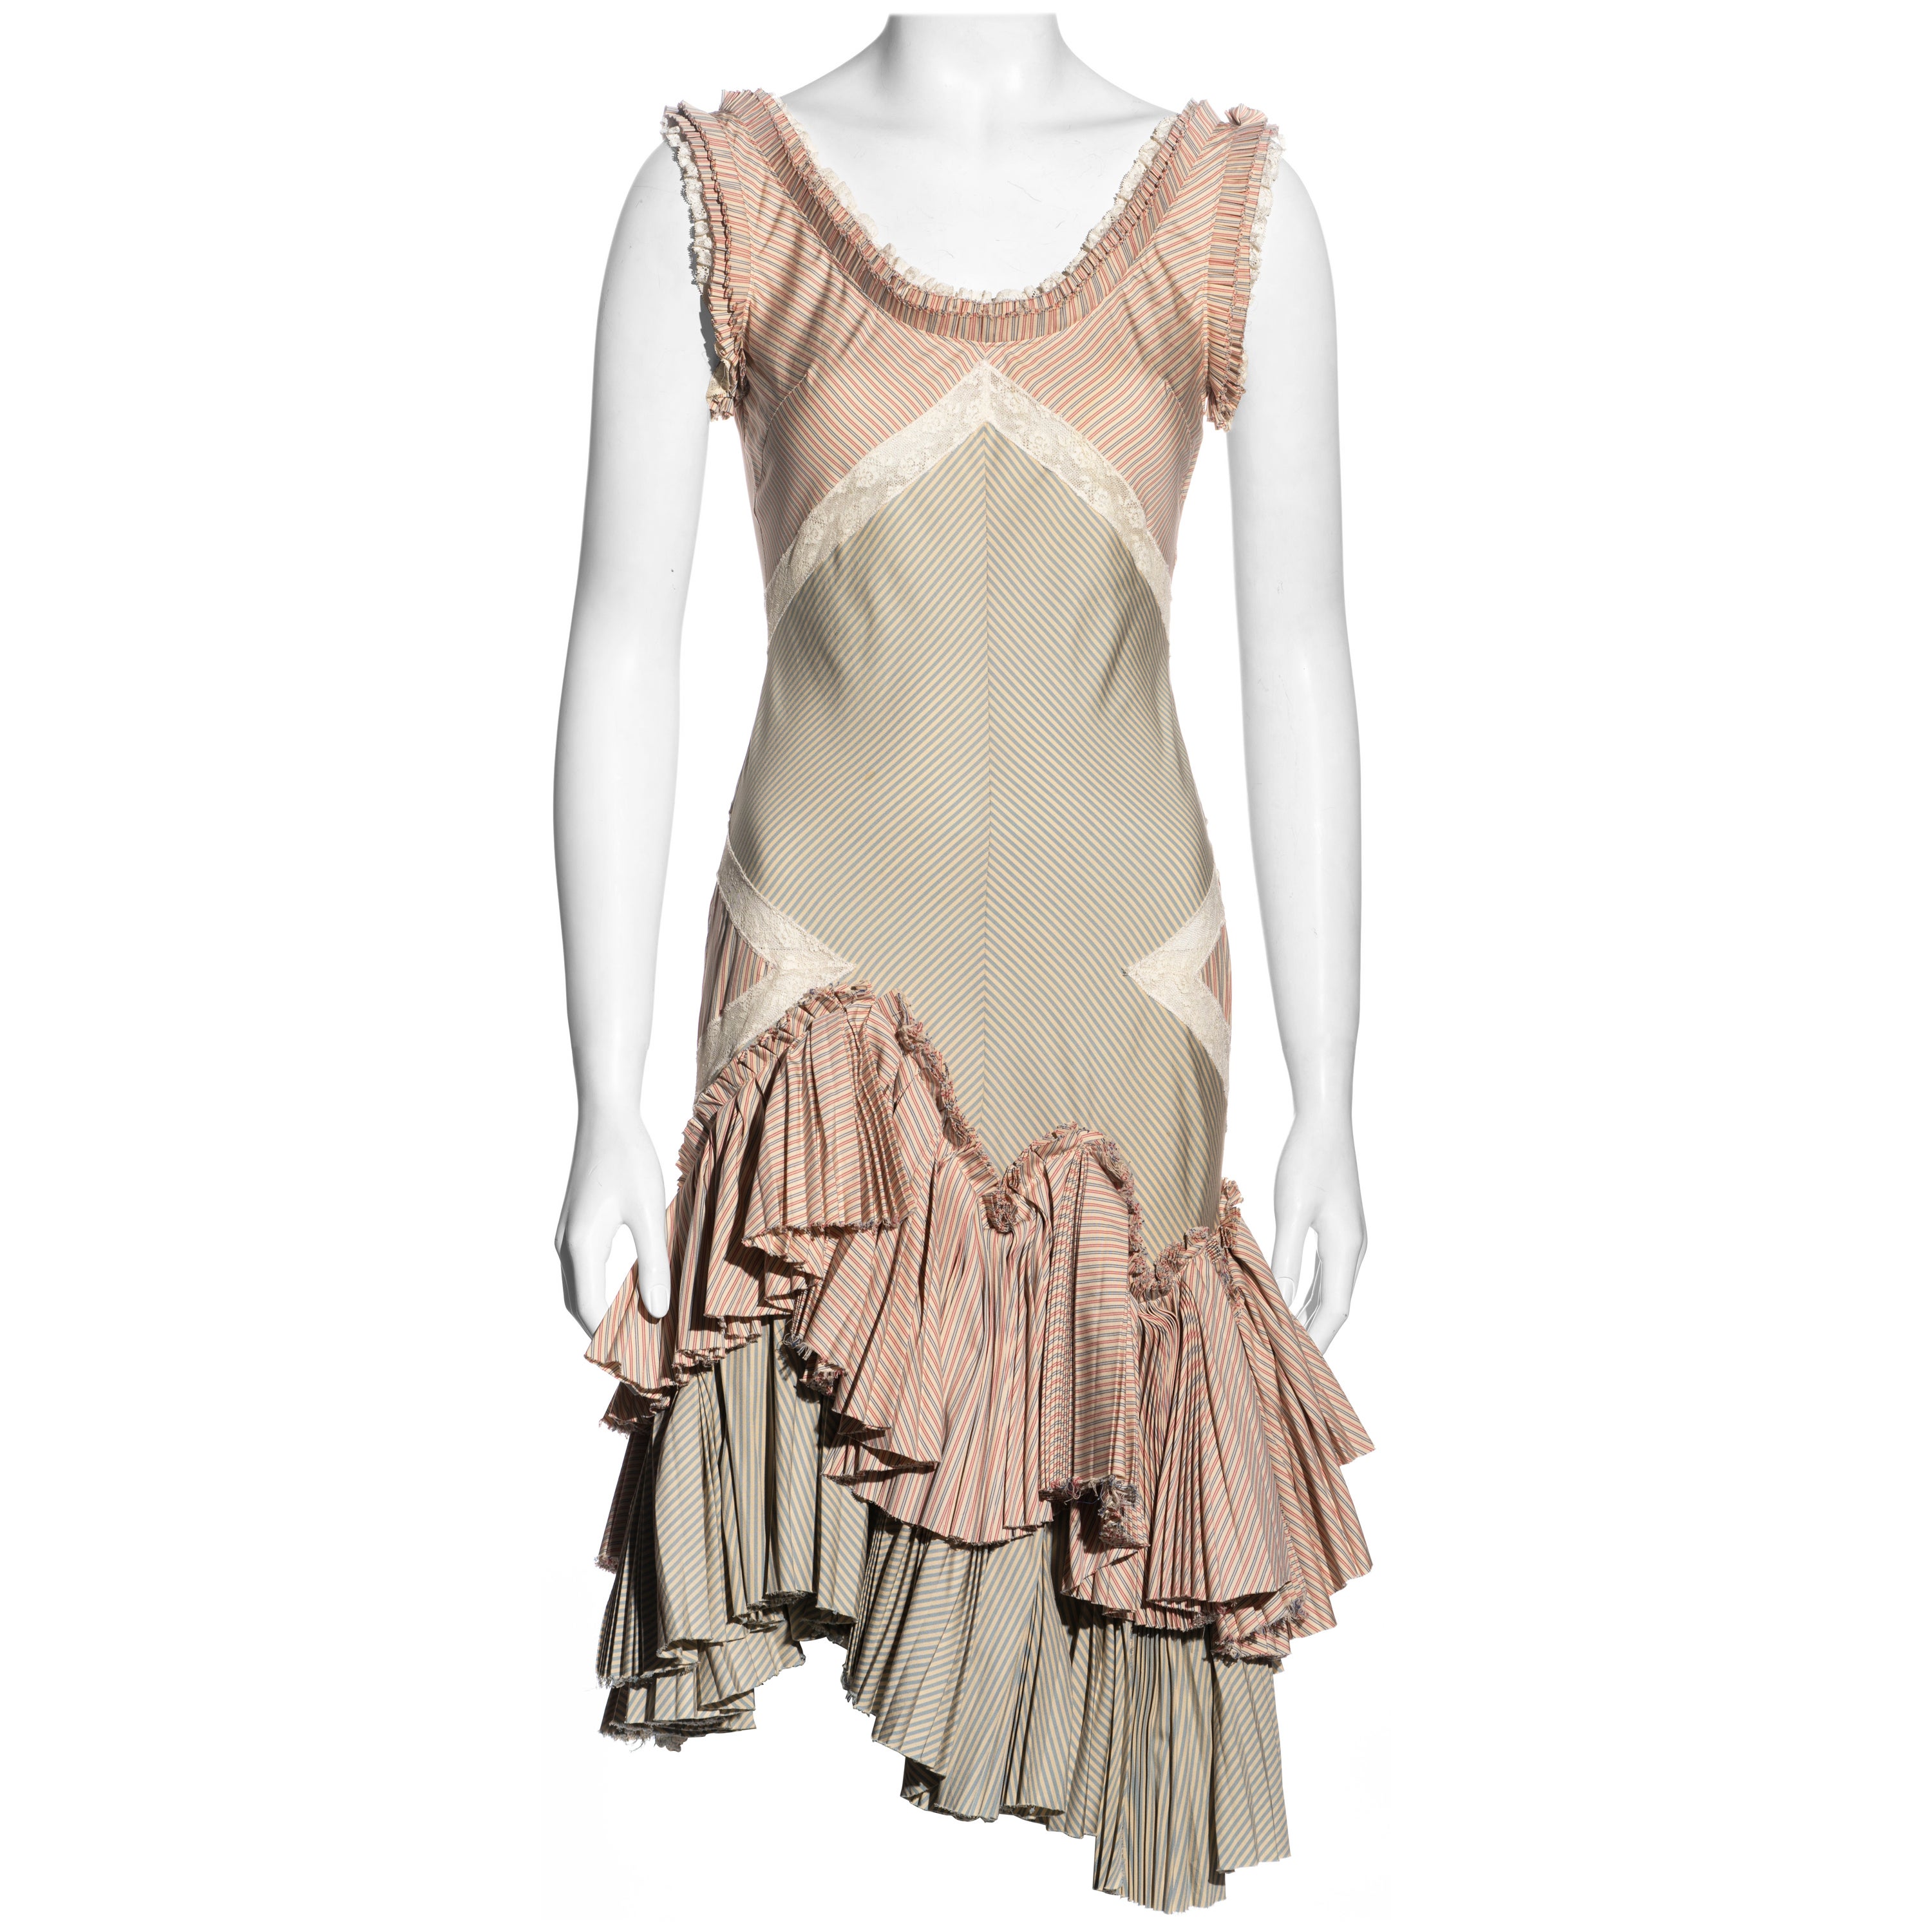 Alexander McQueen striped cotton and lace dress with pleated skirt, ss 2005 For Sale